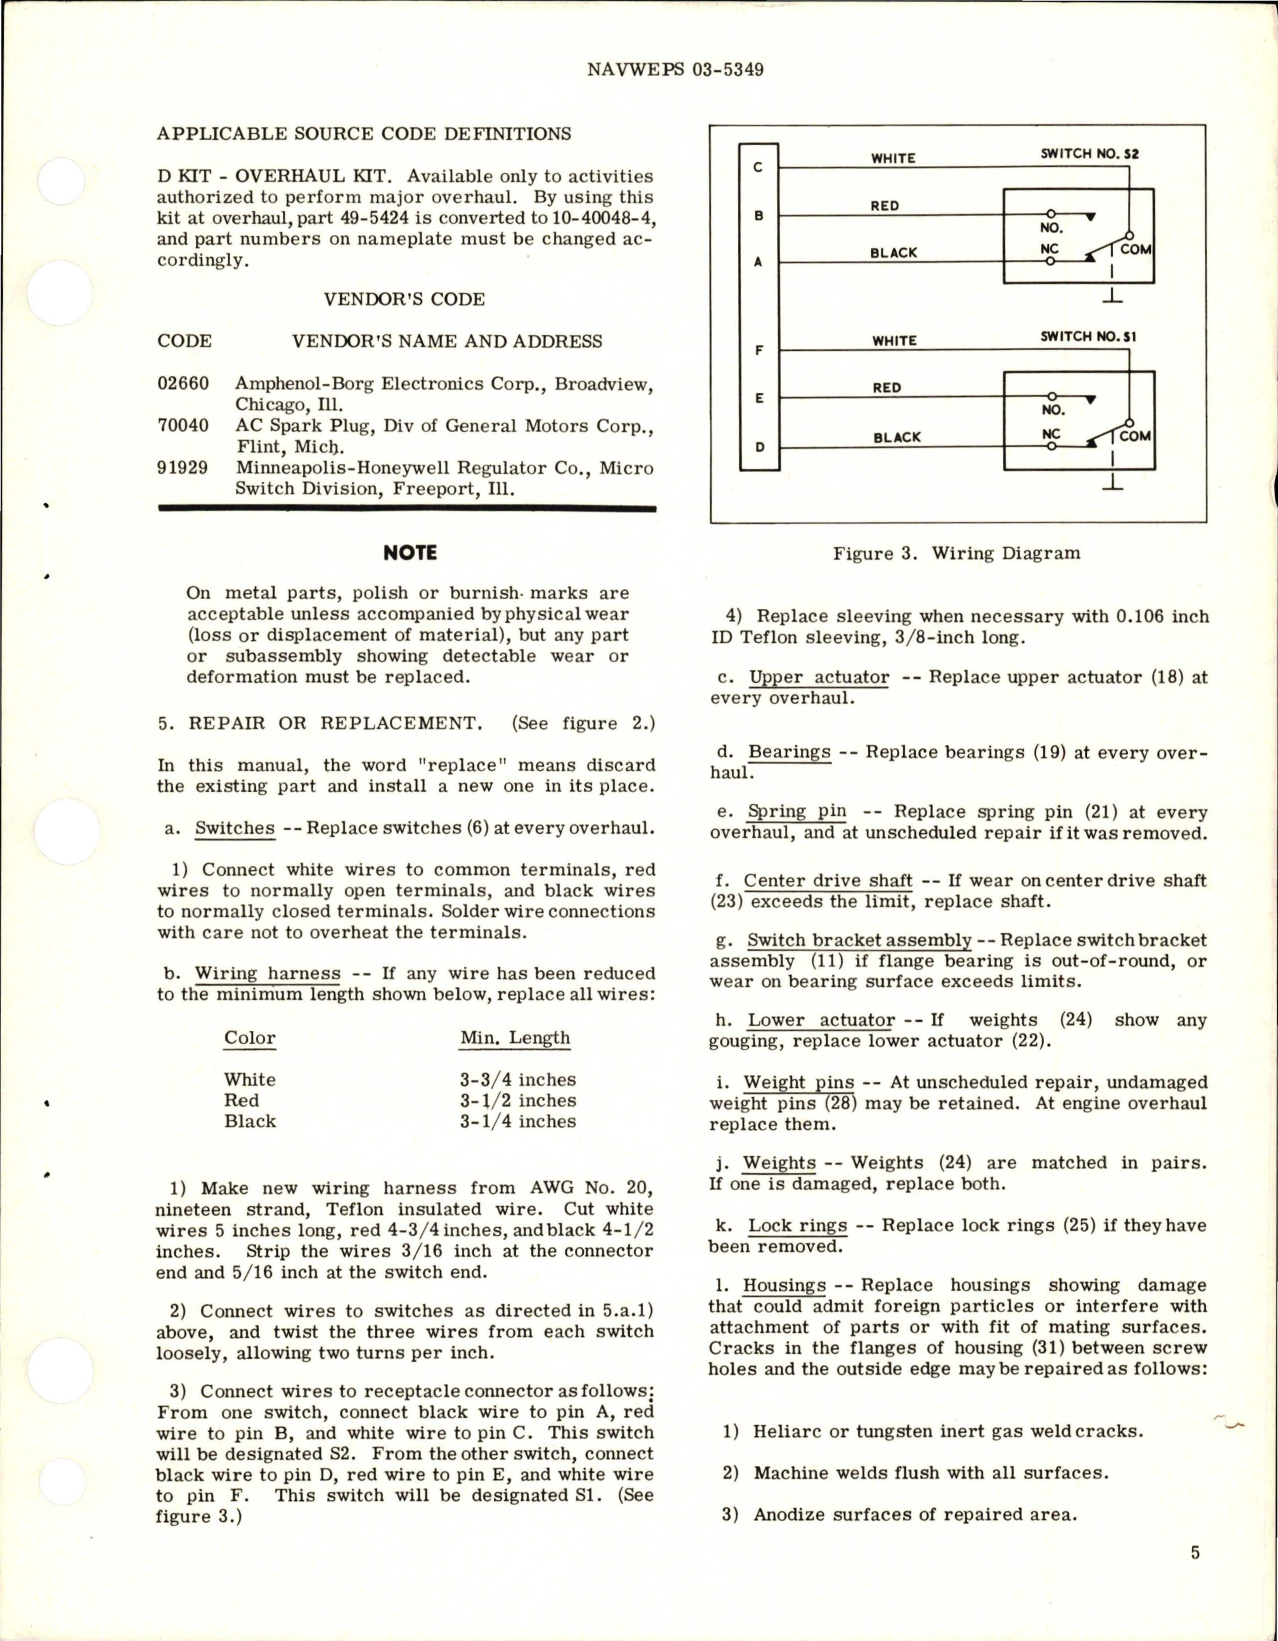 Sample page 5 from AirCorps Library document: Overhaul Instructions with Parts Breakdown for Speed Monitor 